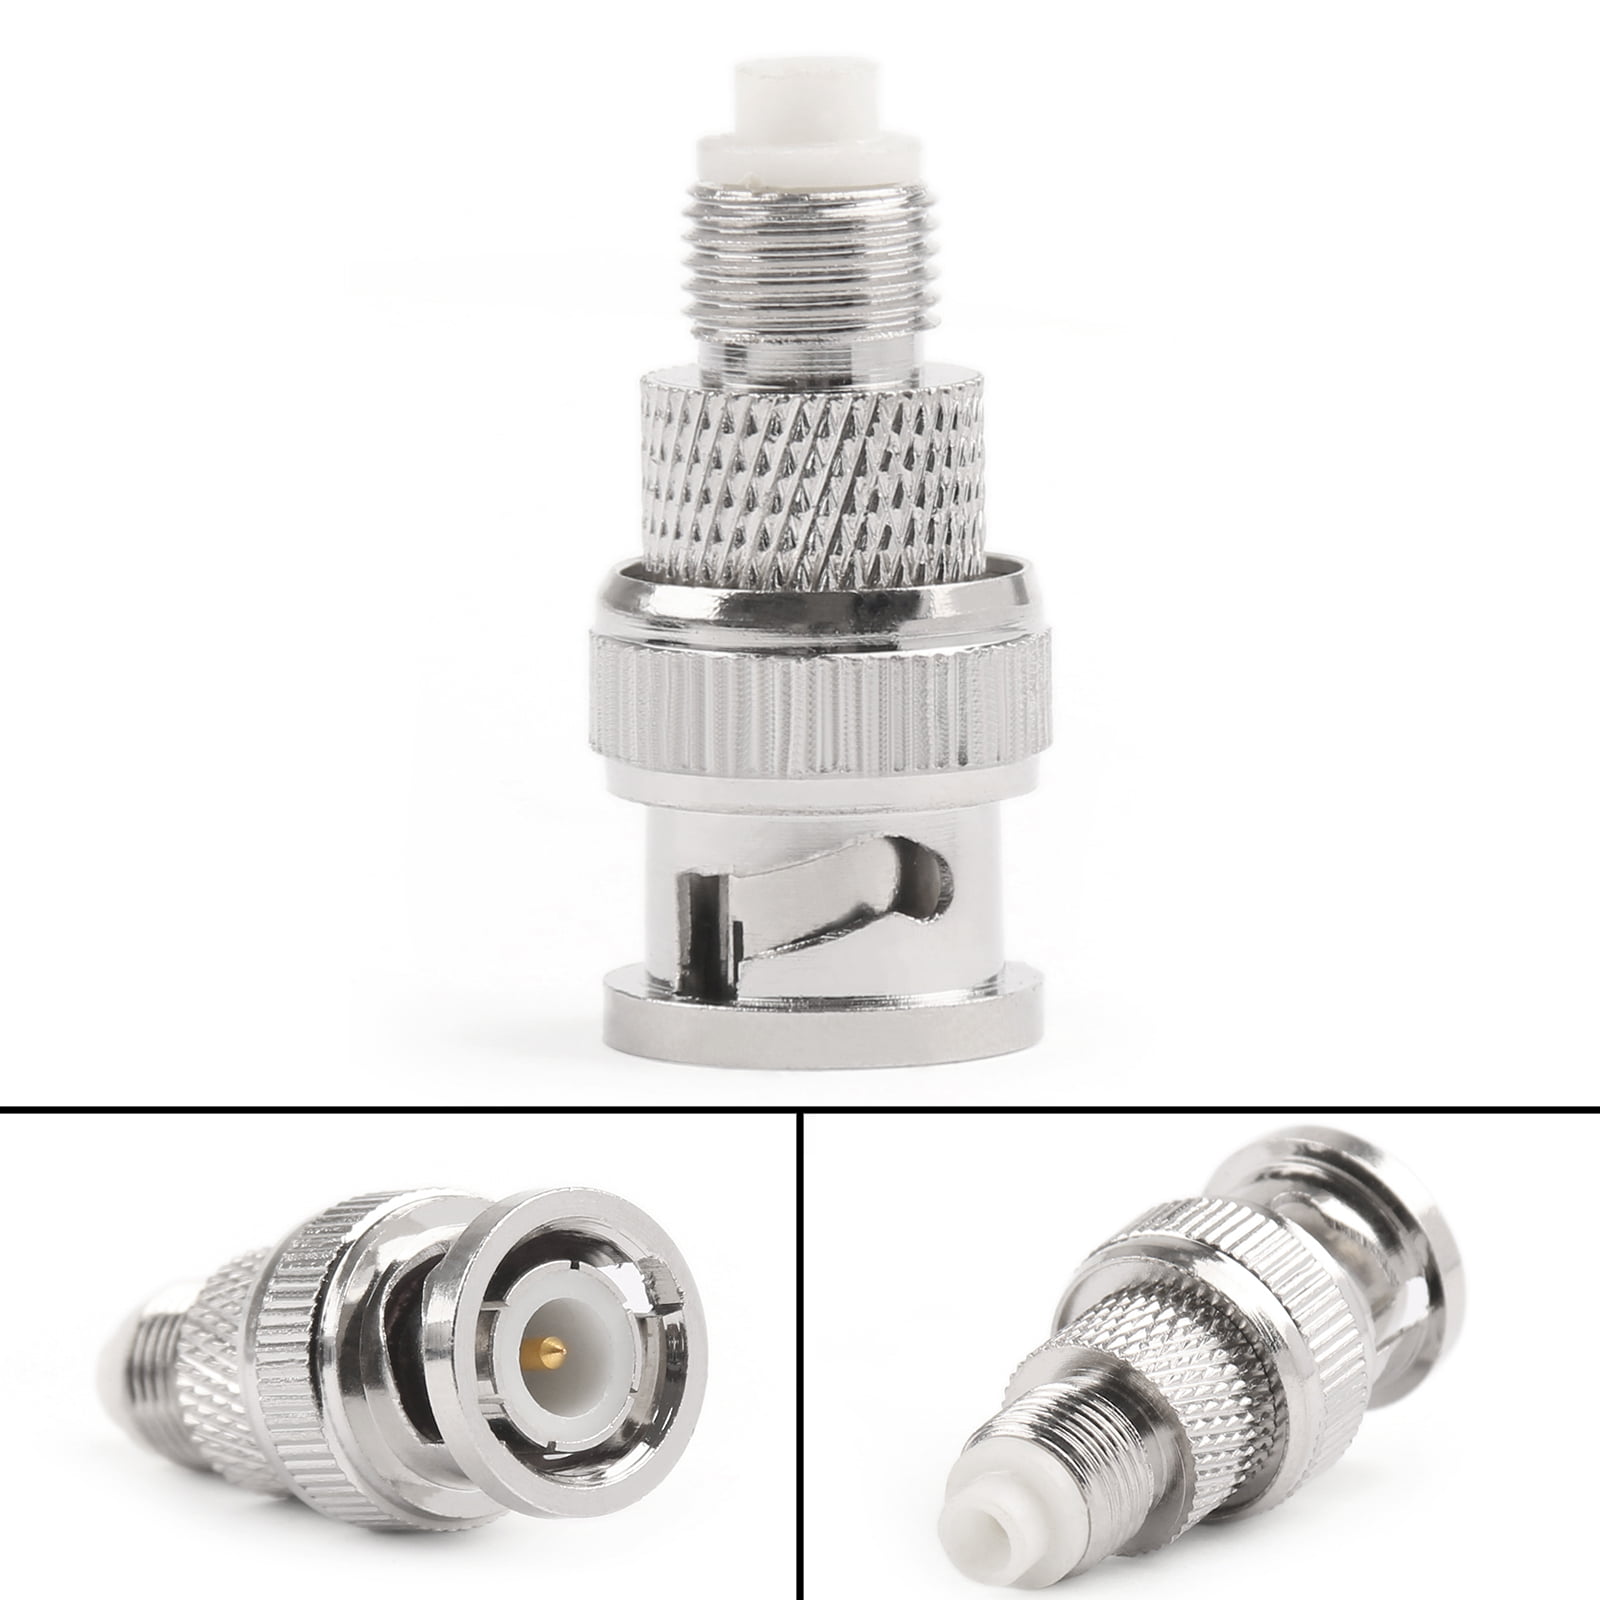 10pcs FME Male Plug to SMA Female Jack Straight RF Coaxial Adapter Connector for sale online